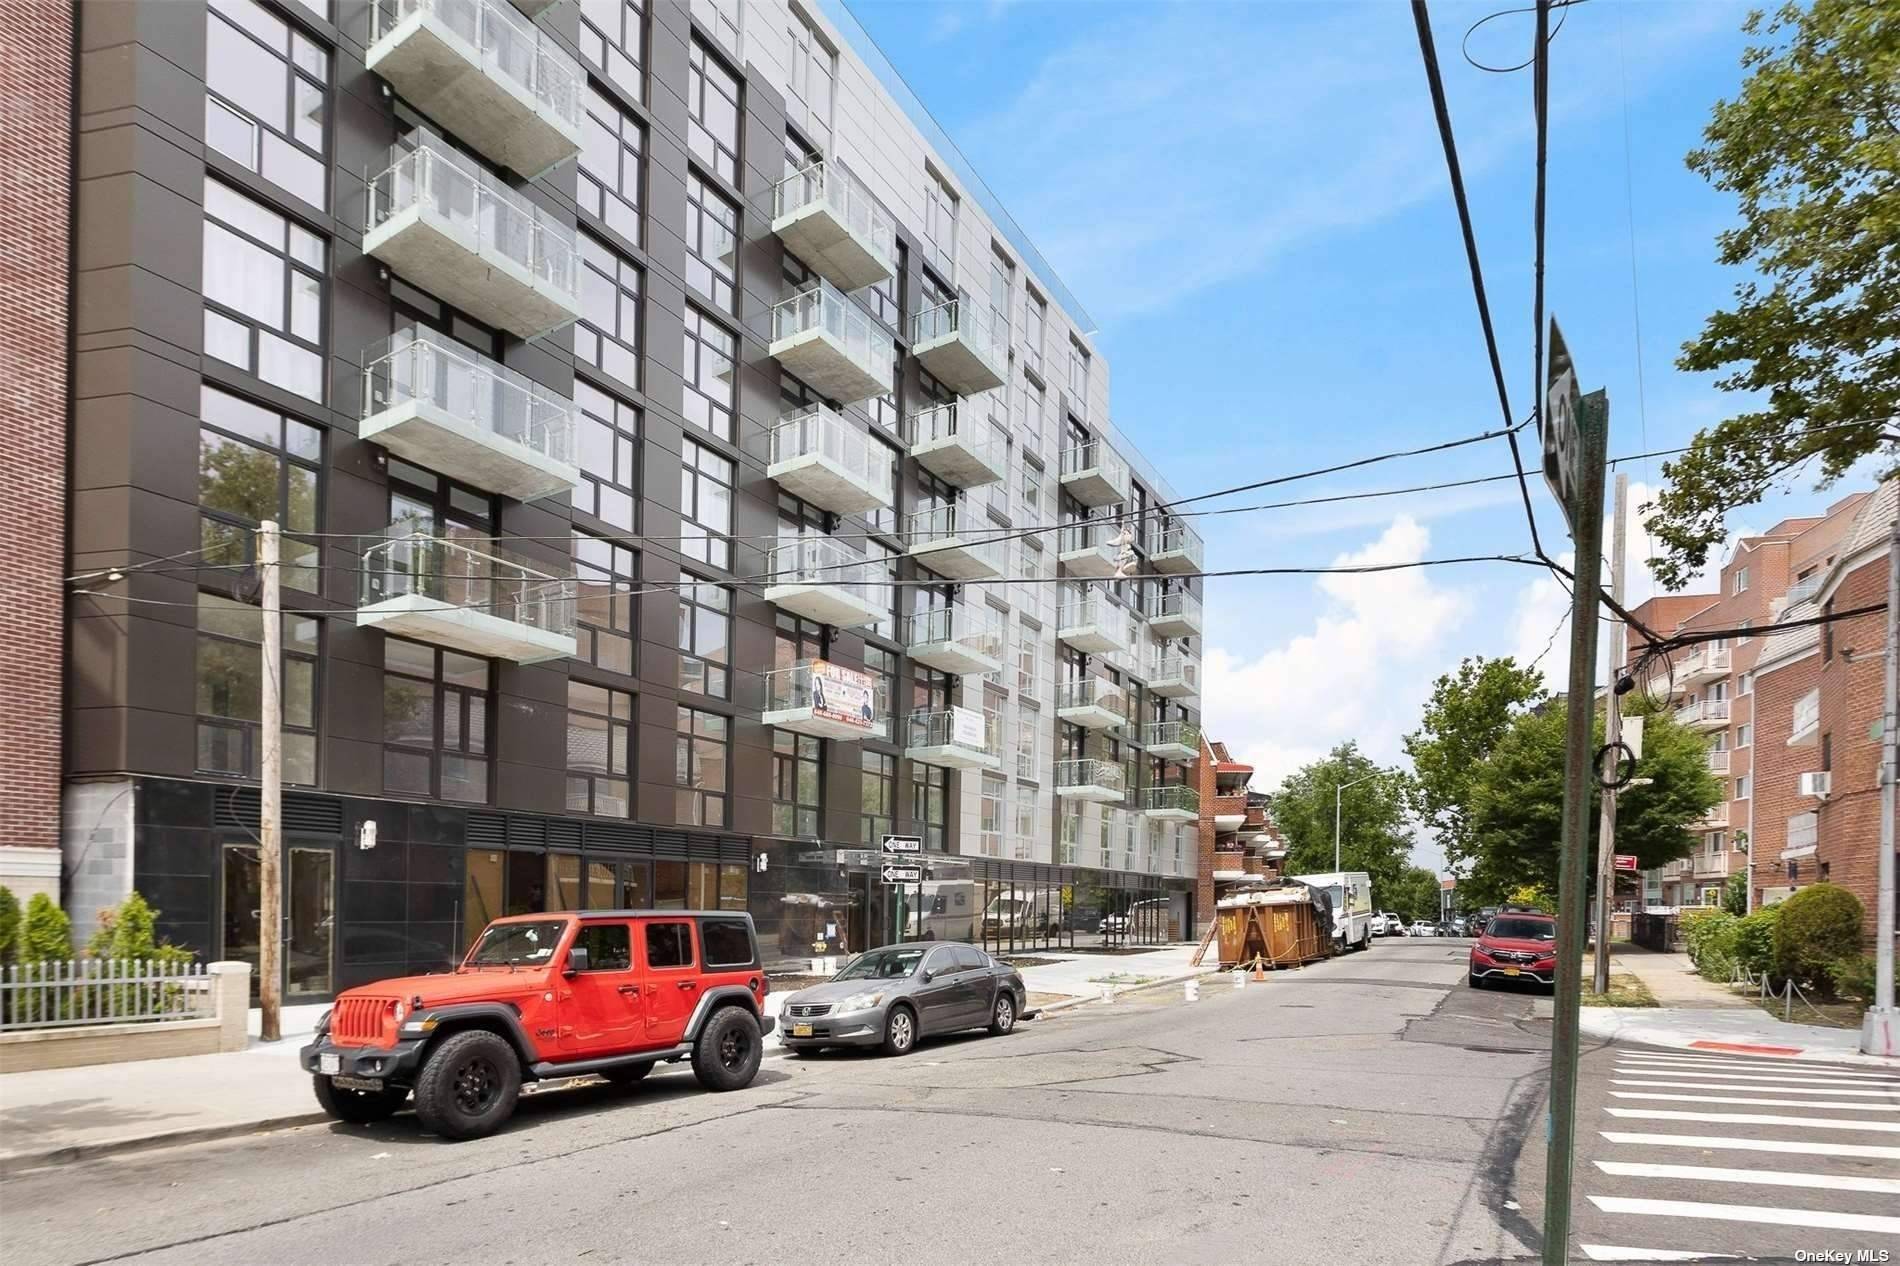 Rego Park Brand New Condo, Busy Area, Spacious open living areas, Modern open space style, Full floor to ceiling windows, Video intercom doorbell system, Smart door lock, Residents only gym, ...